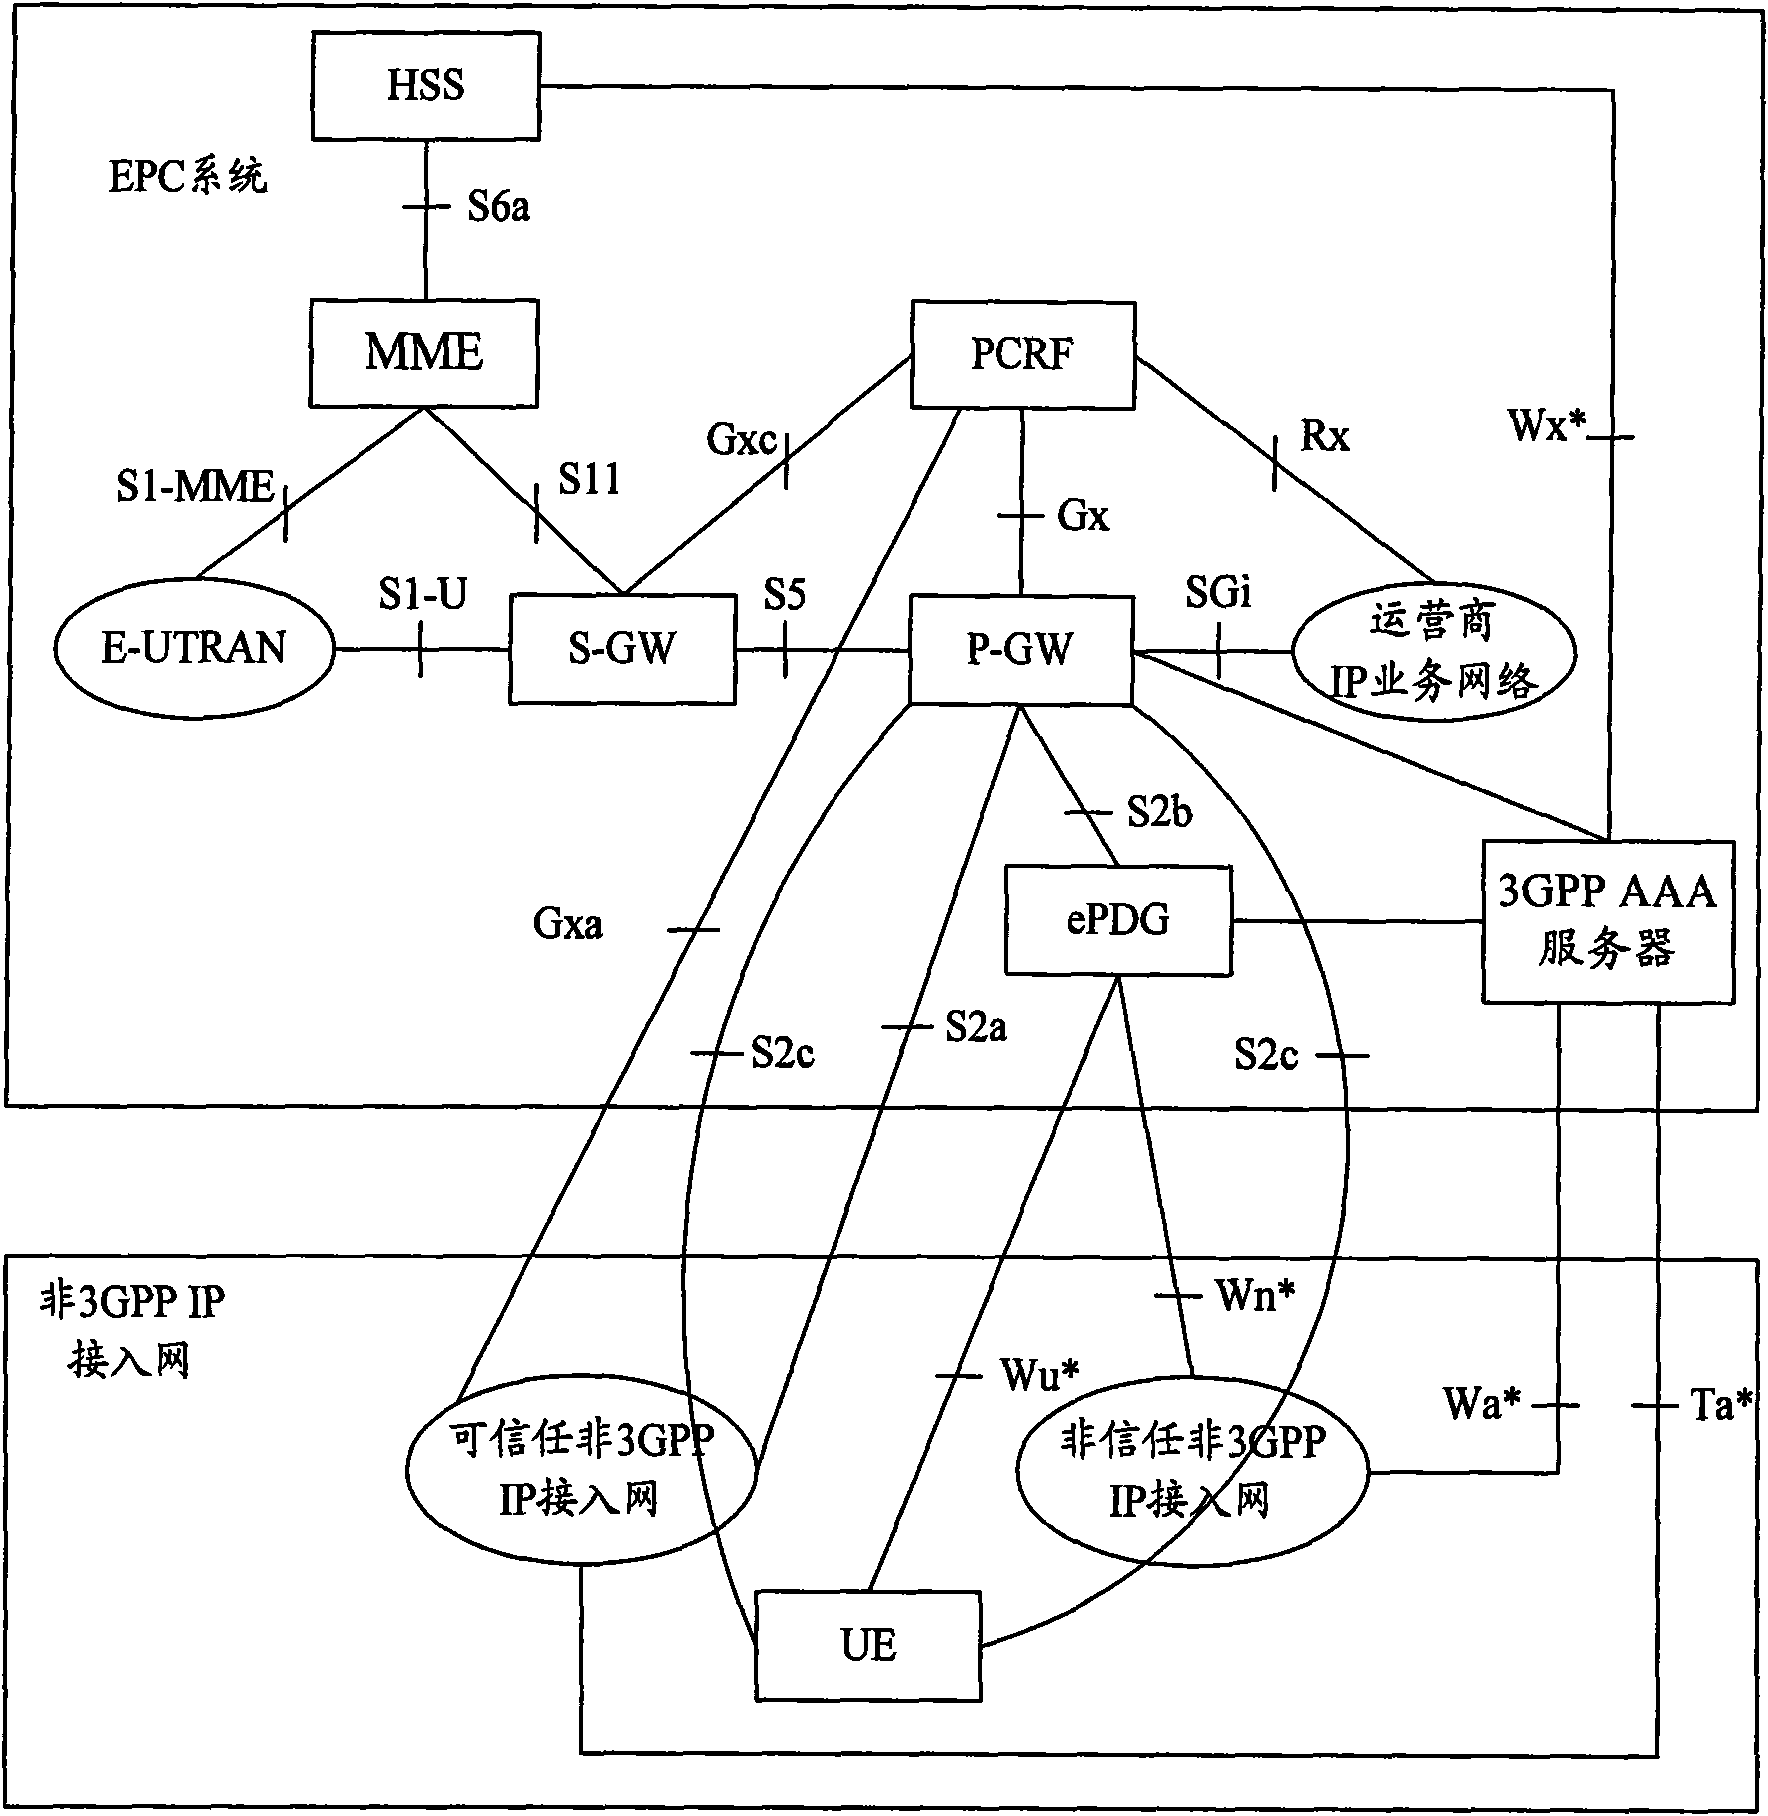 Method and system for providing access network protocol selection function by access network discovery and selection function (ANDSF)